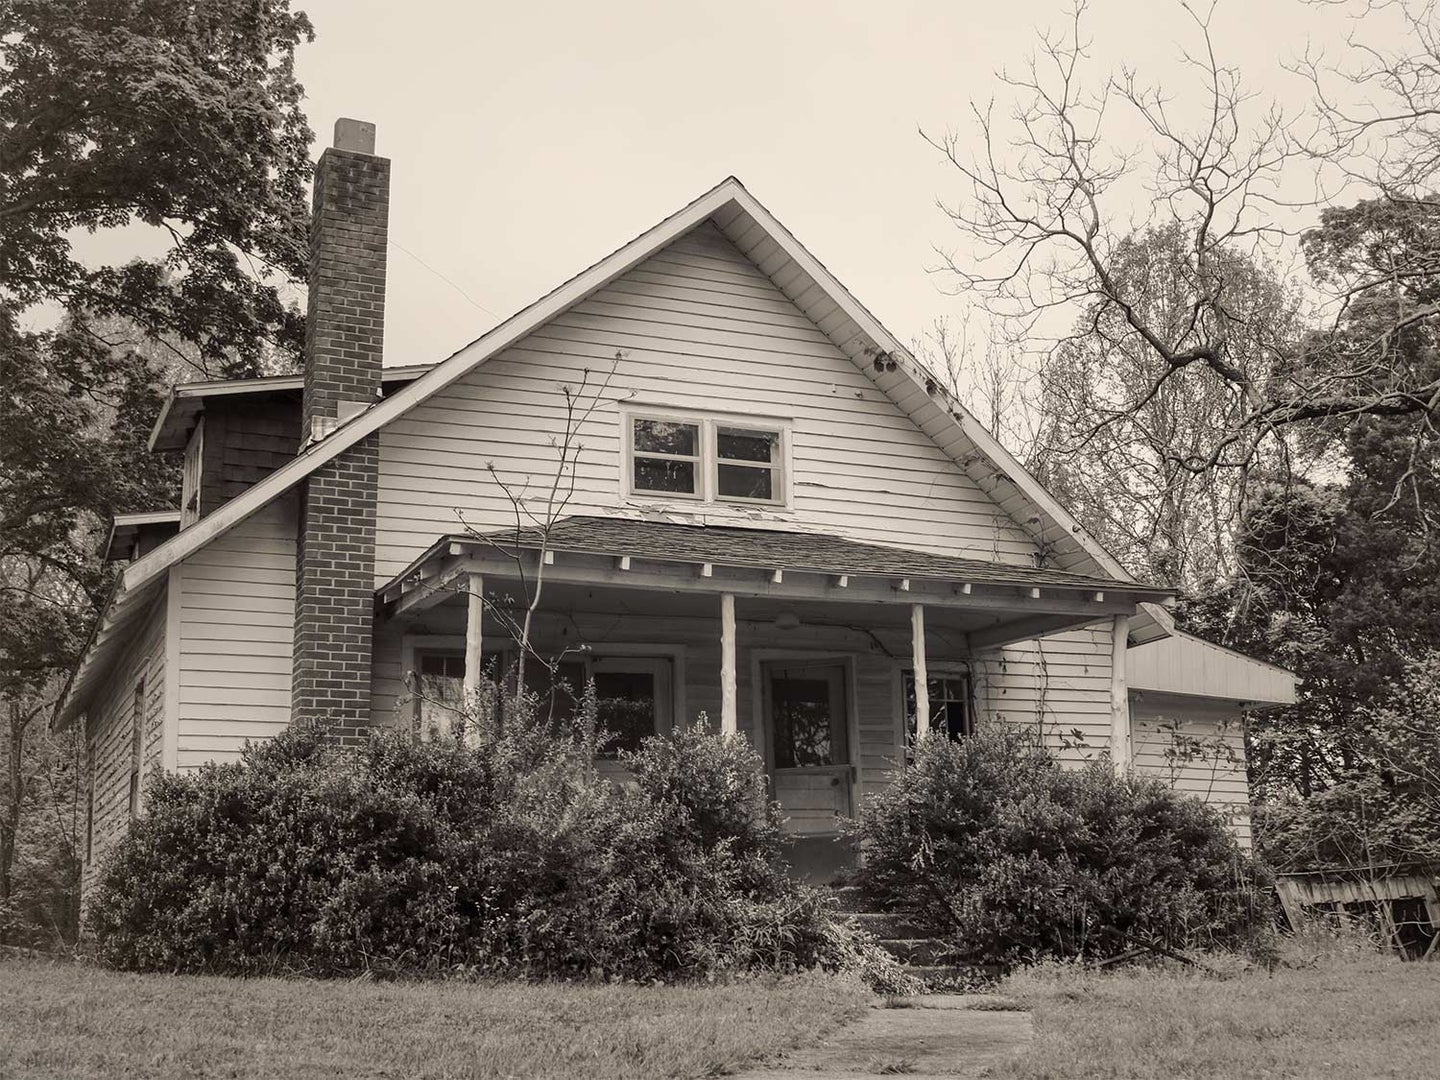 A black and white photo of an old farm house with peeling paint and oversized bushes growing beside the front porch.